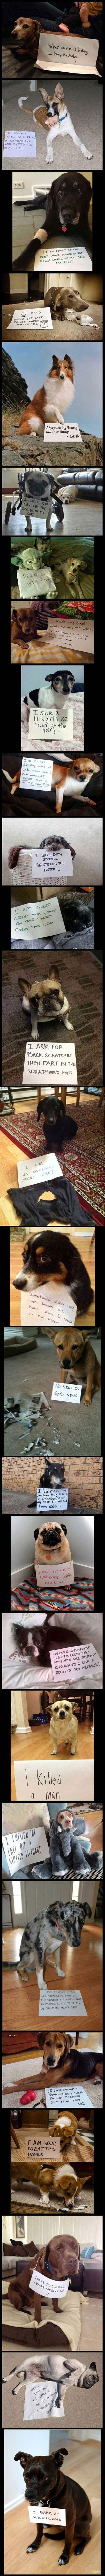 funny dog shaming pictures